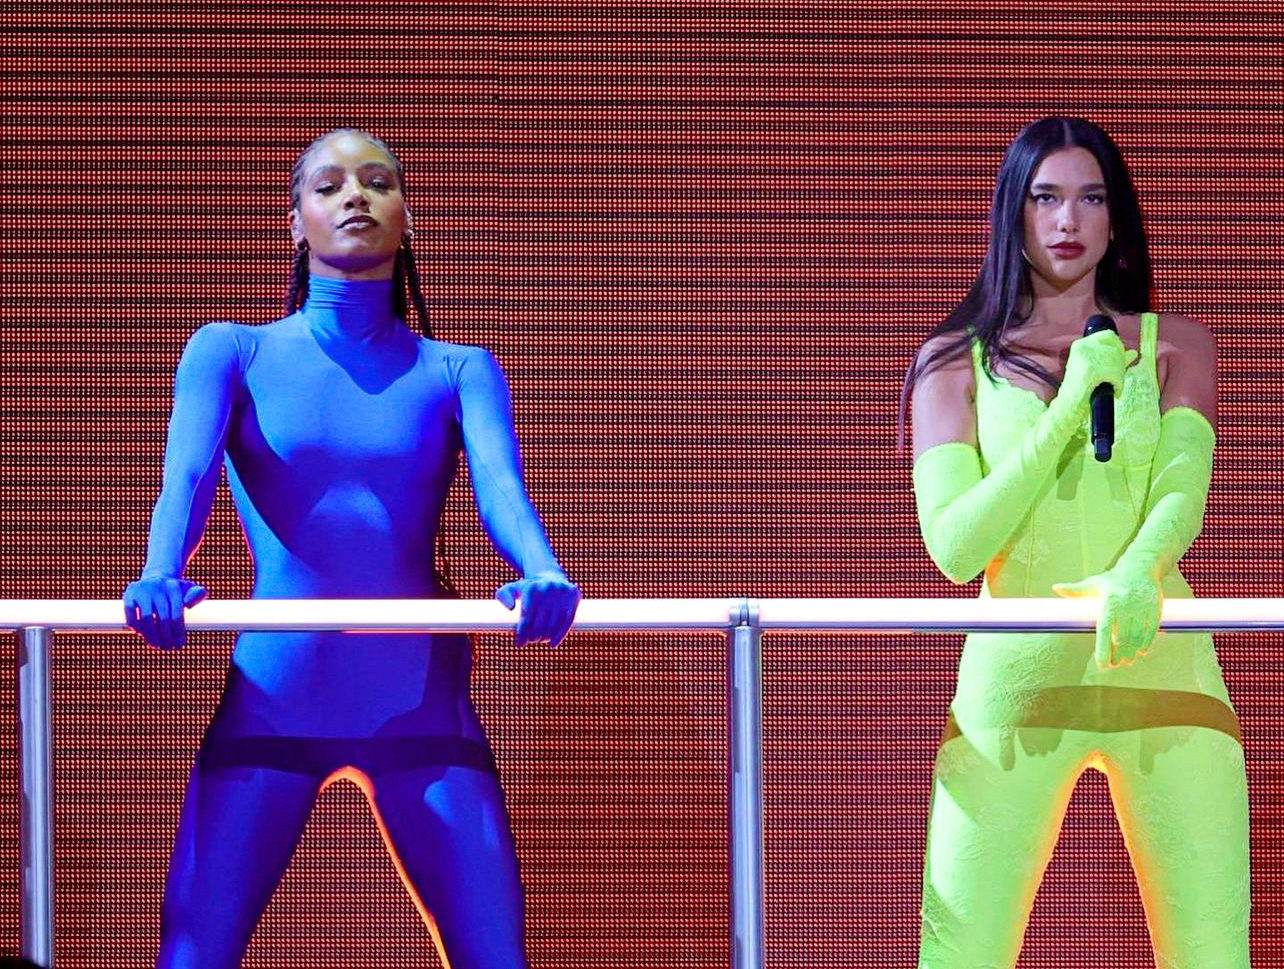 Demi Rox (left) wears a bright blue longsleeve spandex suit and poses confidently onstage, her hands gripping a metal bar in front of her. Dua Lipa (right) wears a highlighter yellow spandex suit and sings into a microphone.